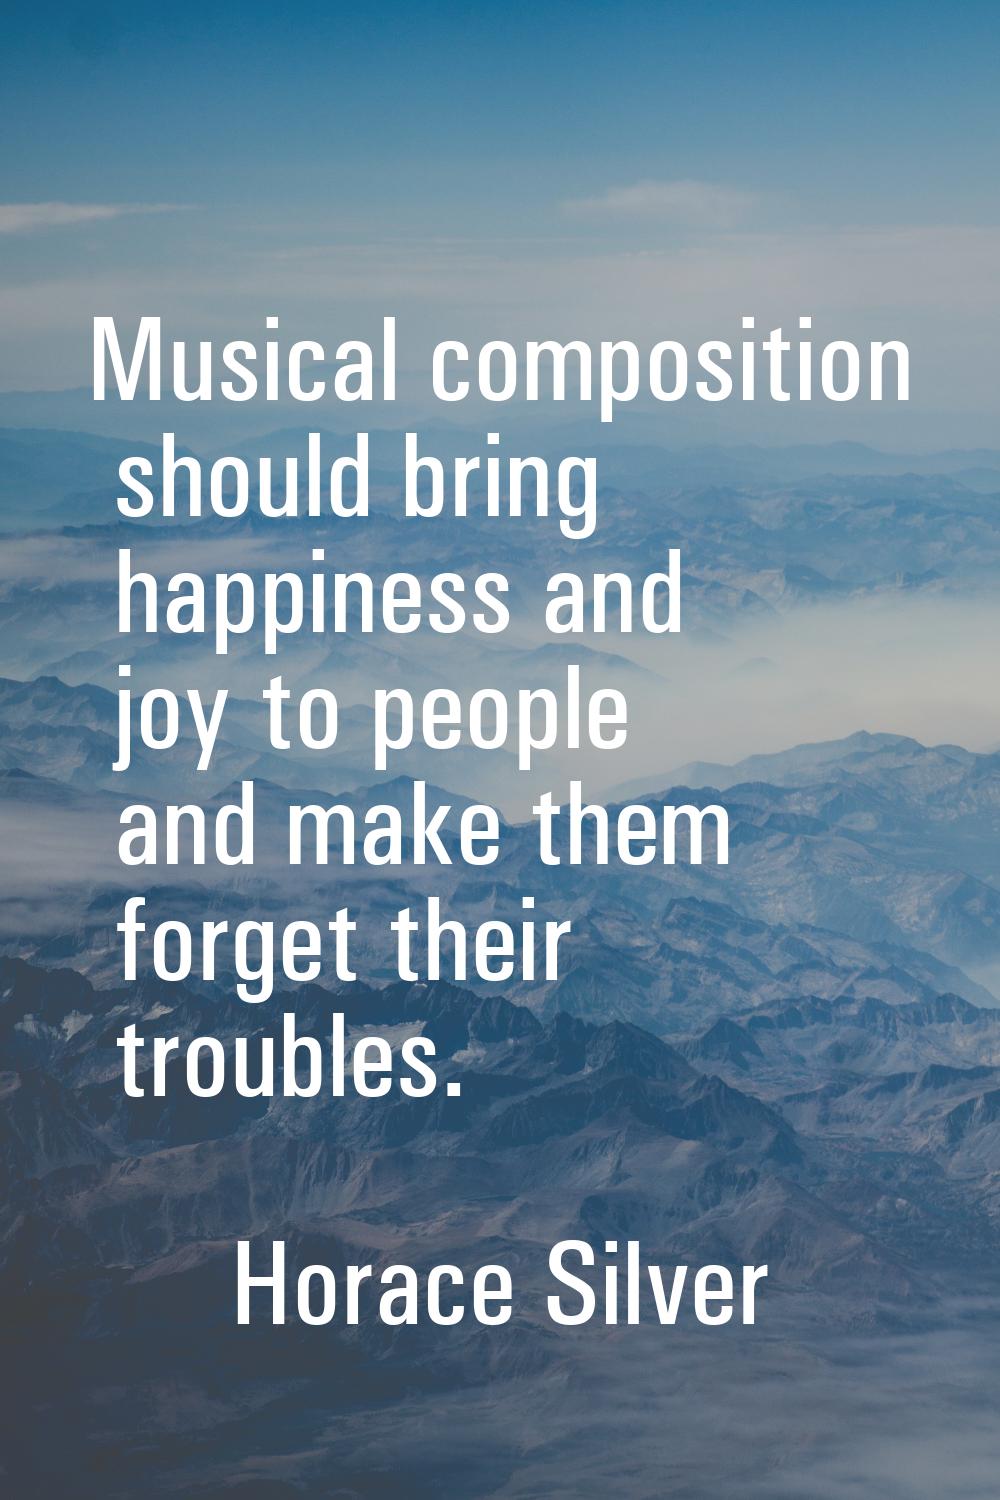 Musical composition should bring happiness and joy to people and make them forget their troubles.